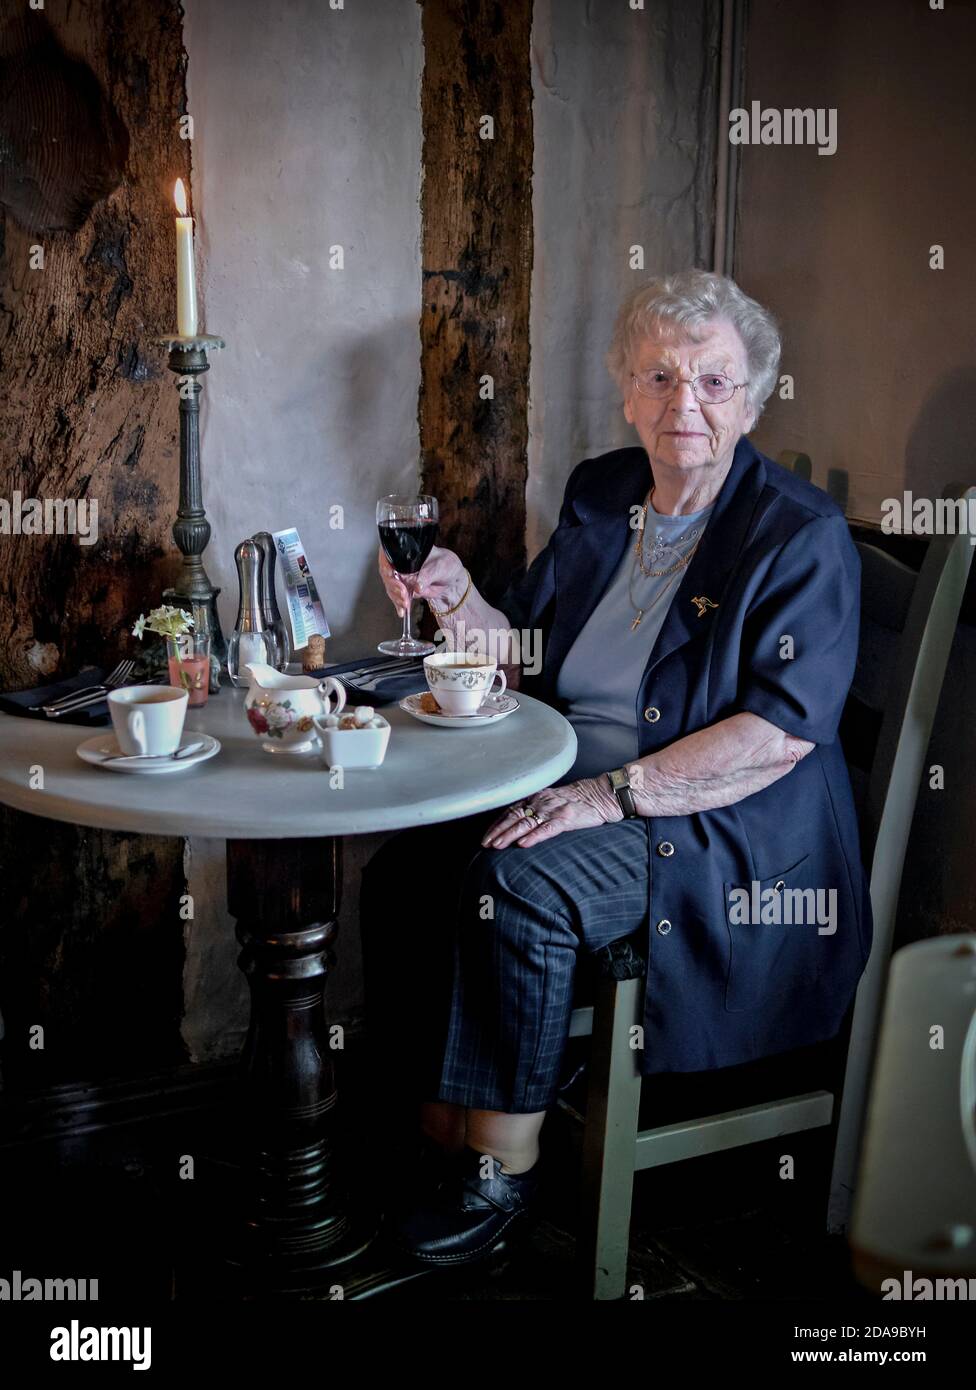 90 year old woman, nonagenarian English lady celebrating her birthday with a glass of red wine at a candlelit restaurant. England UK Stock Photo